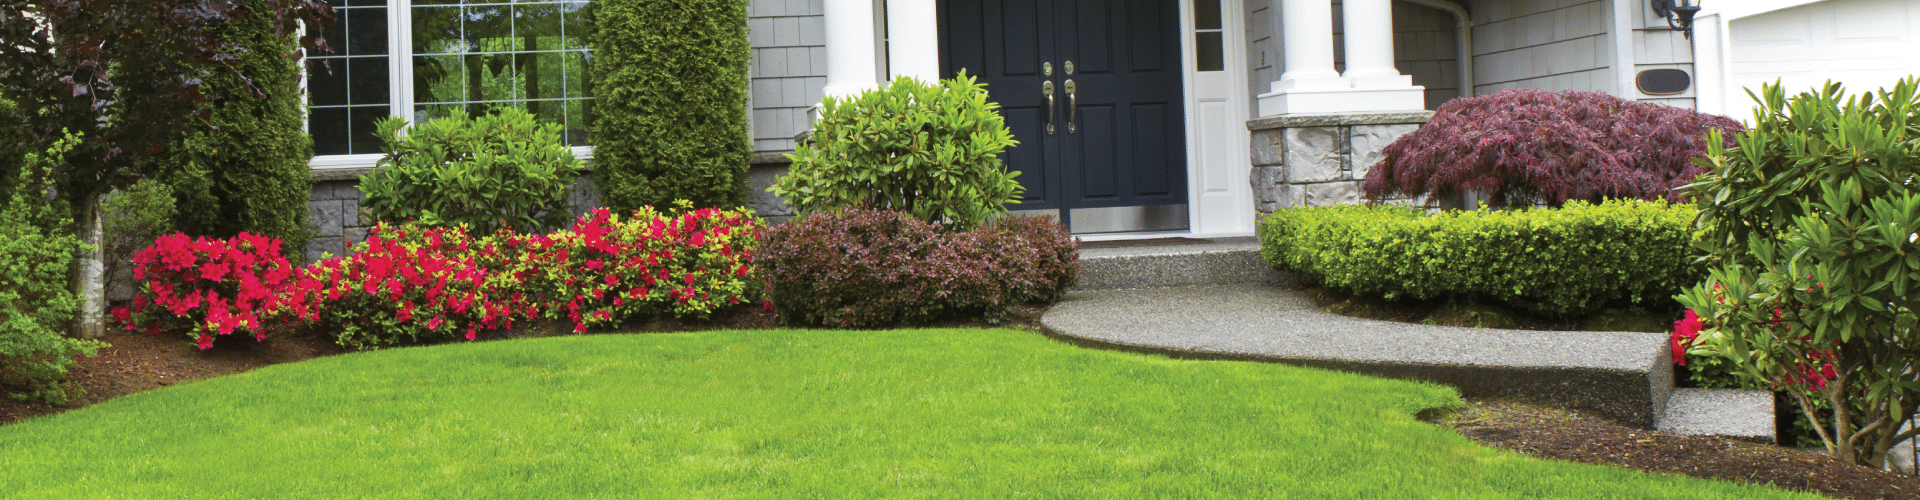 Soils and Mulches for Landscaping Perfection